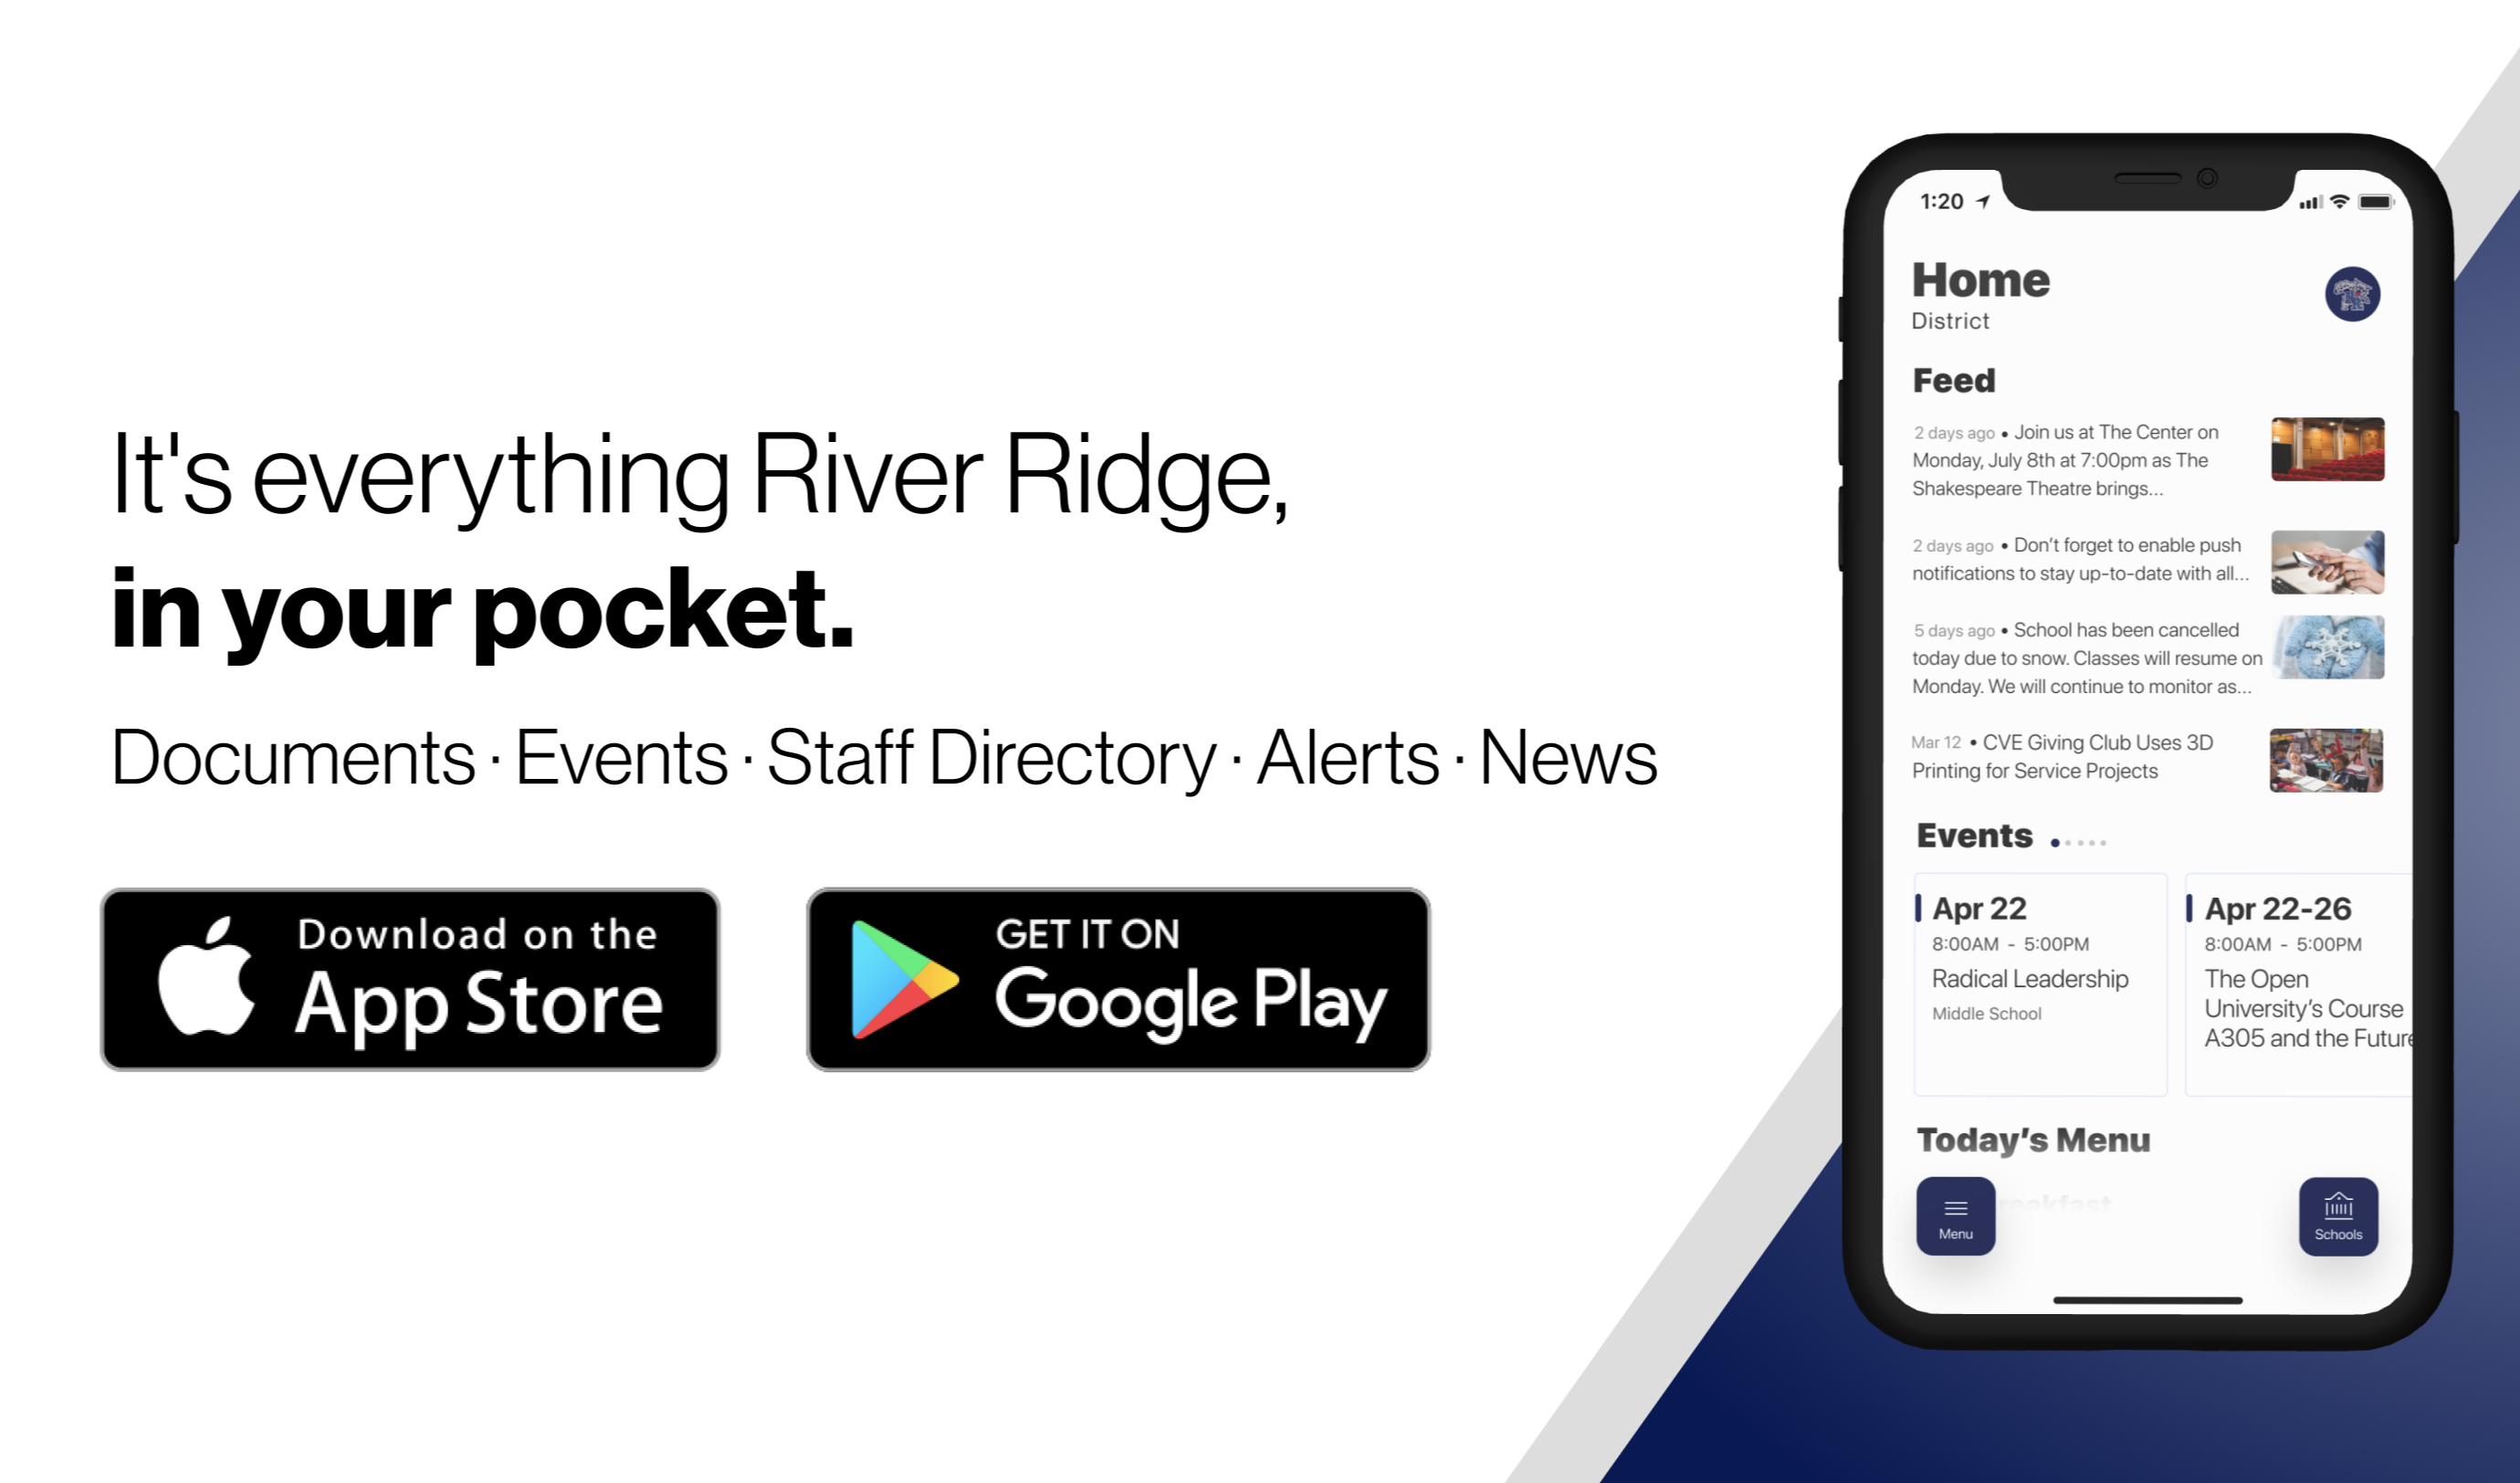 It's everything River Ridge in your pcoket:  Documents, alerts, events, staff directory